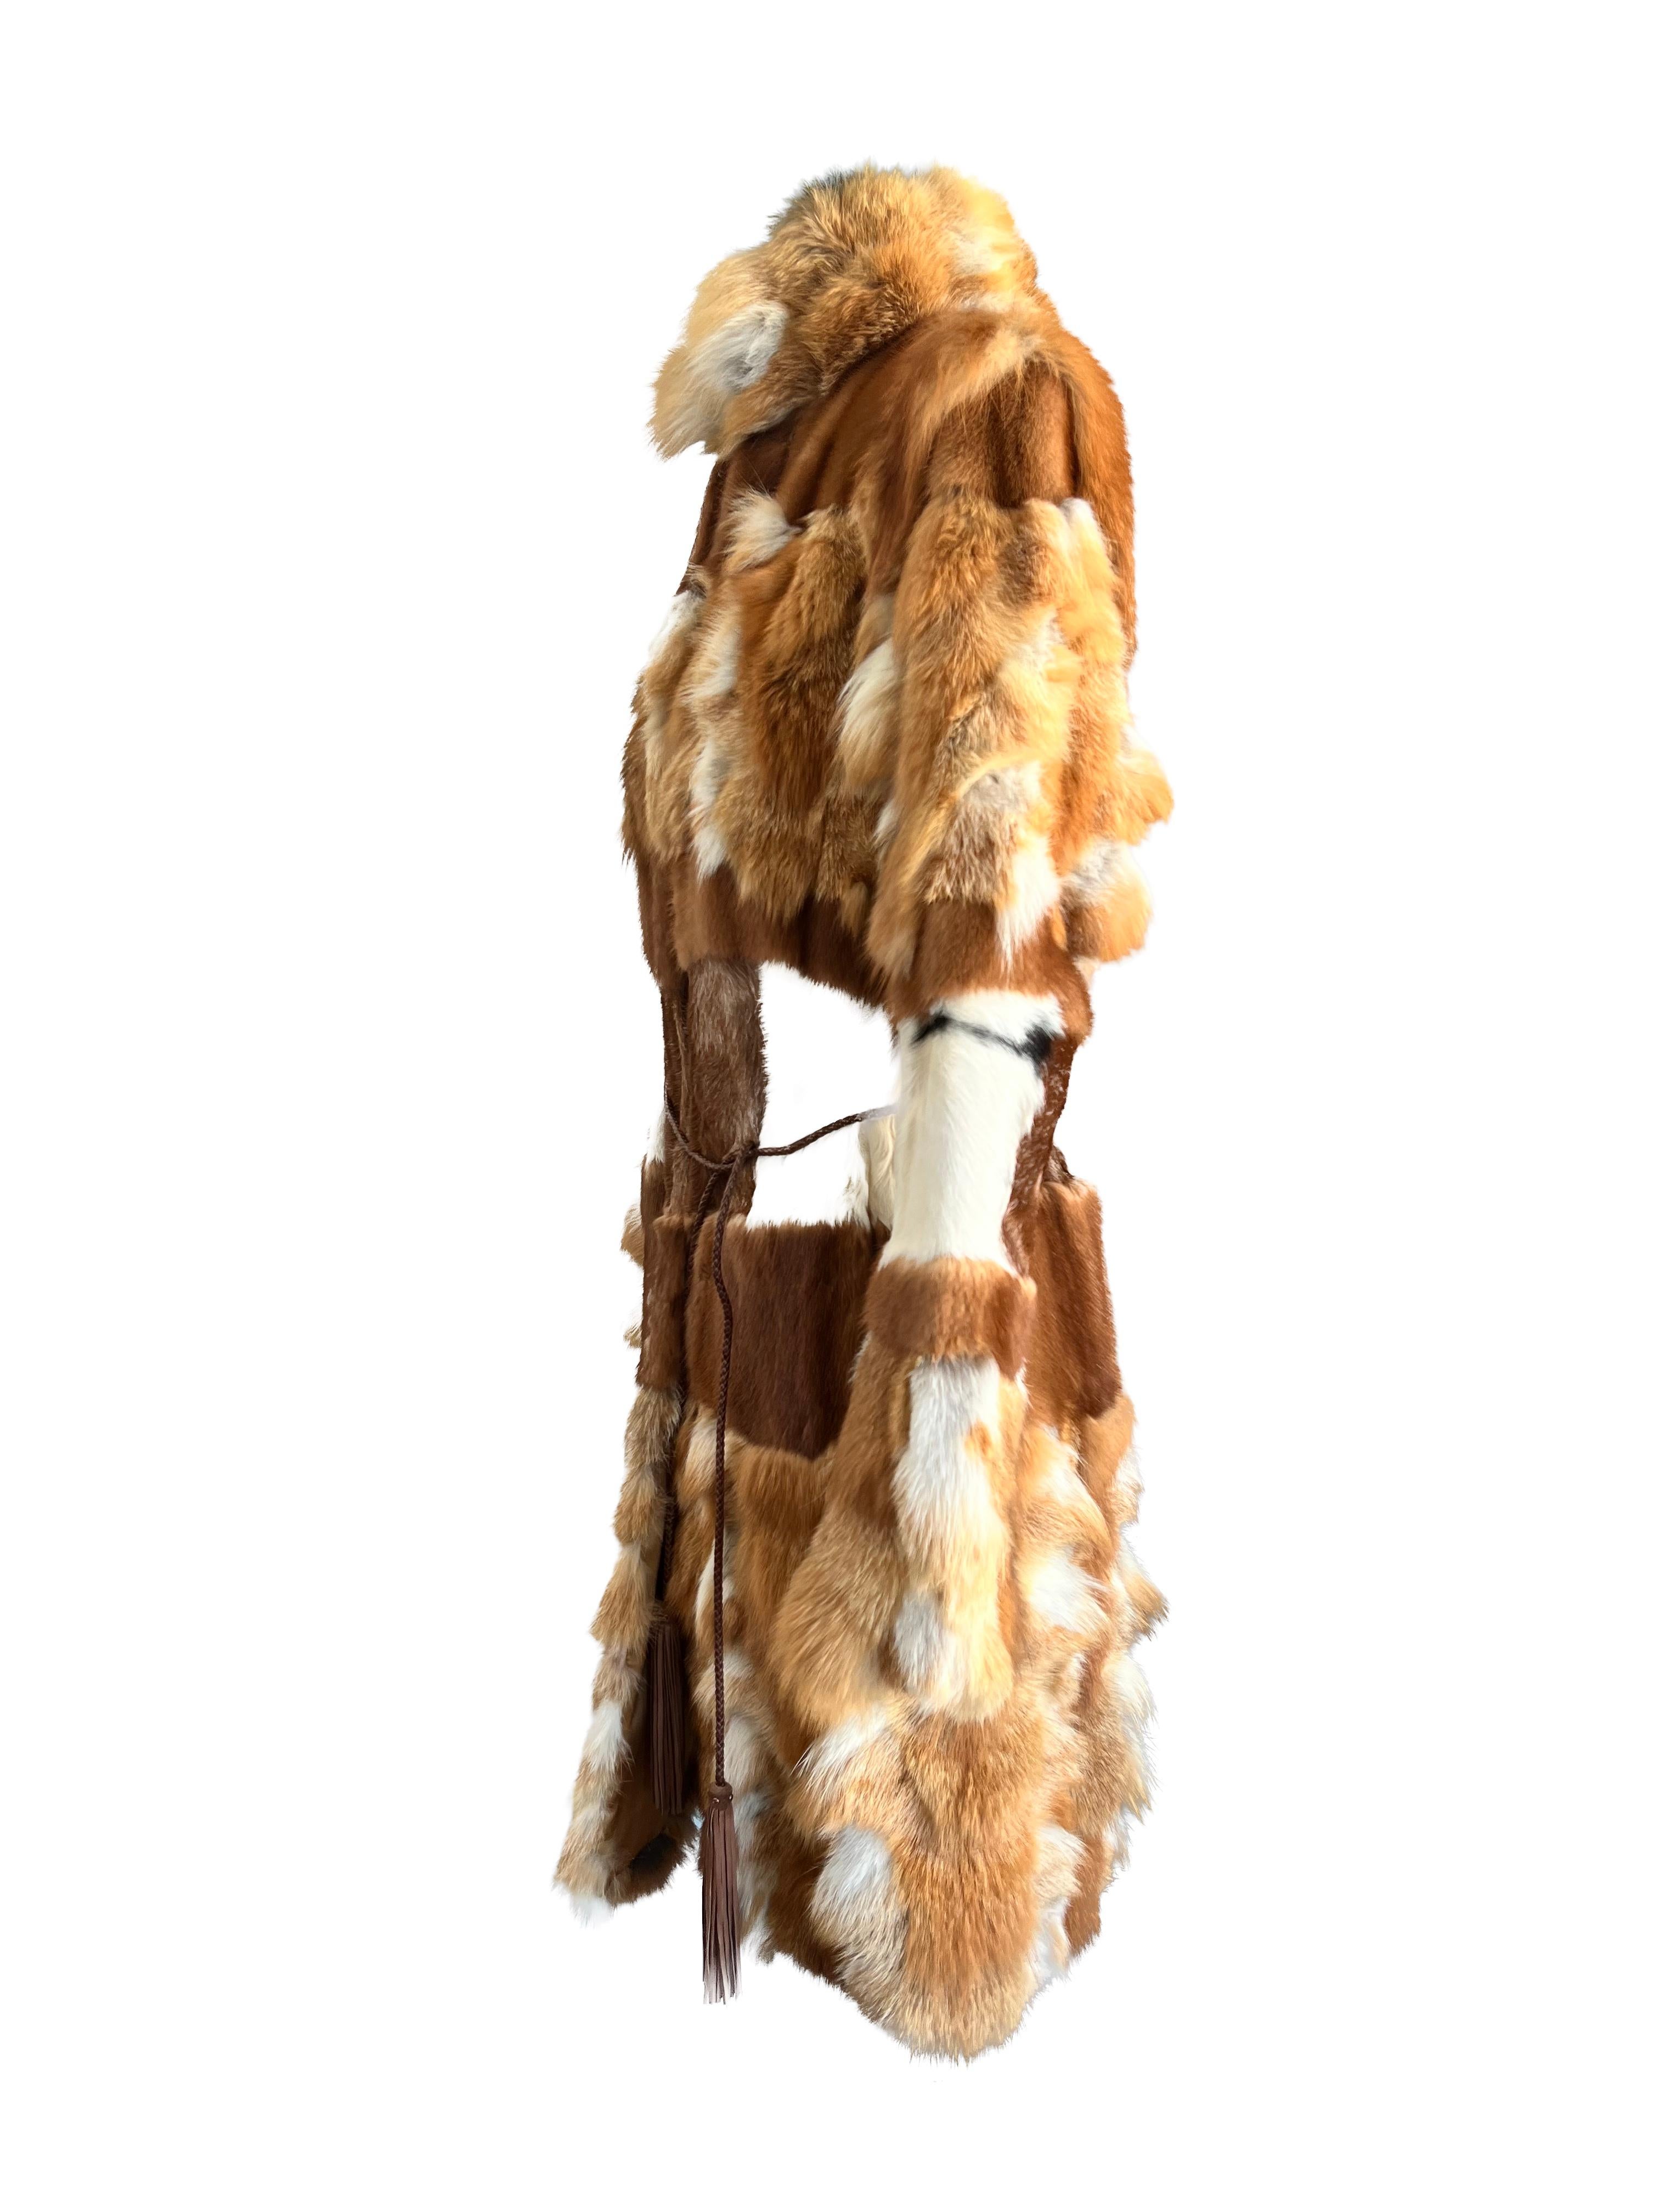 Indulge in opulent luxury with the Roberto Cavalli Patchwork Fox Fur Coat, a true masterpiece that fuses artisan craftsmanship with high-end fashion. This coat is a striking testament to Roberto Cavalli's dedication to bold designs and exquisite